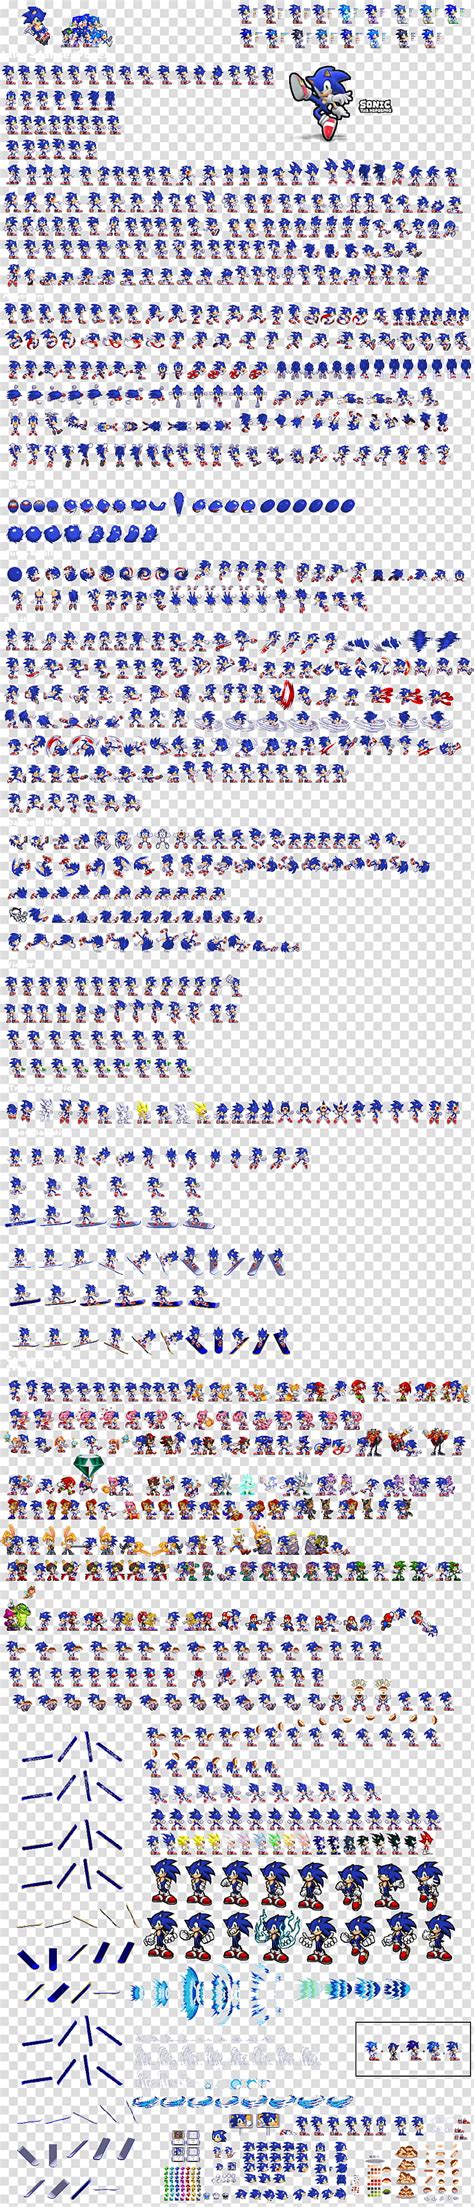 Sonic Classic Modern Mix Ultimate Sprite Sheet Transparent Background